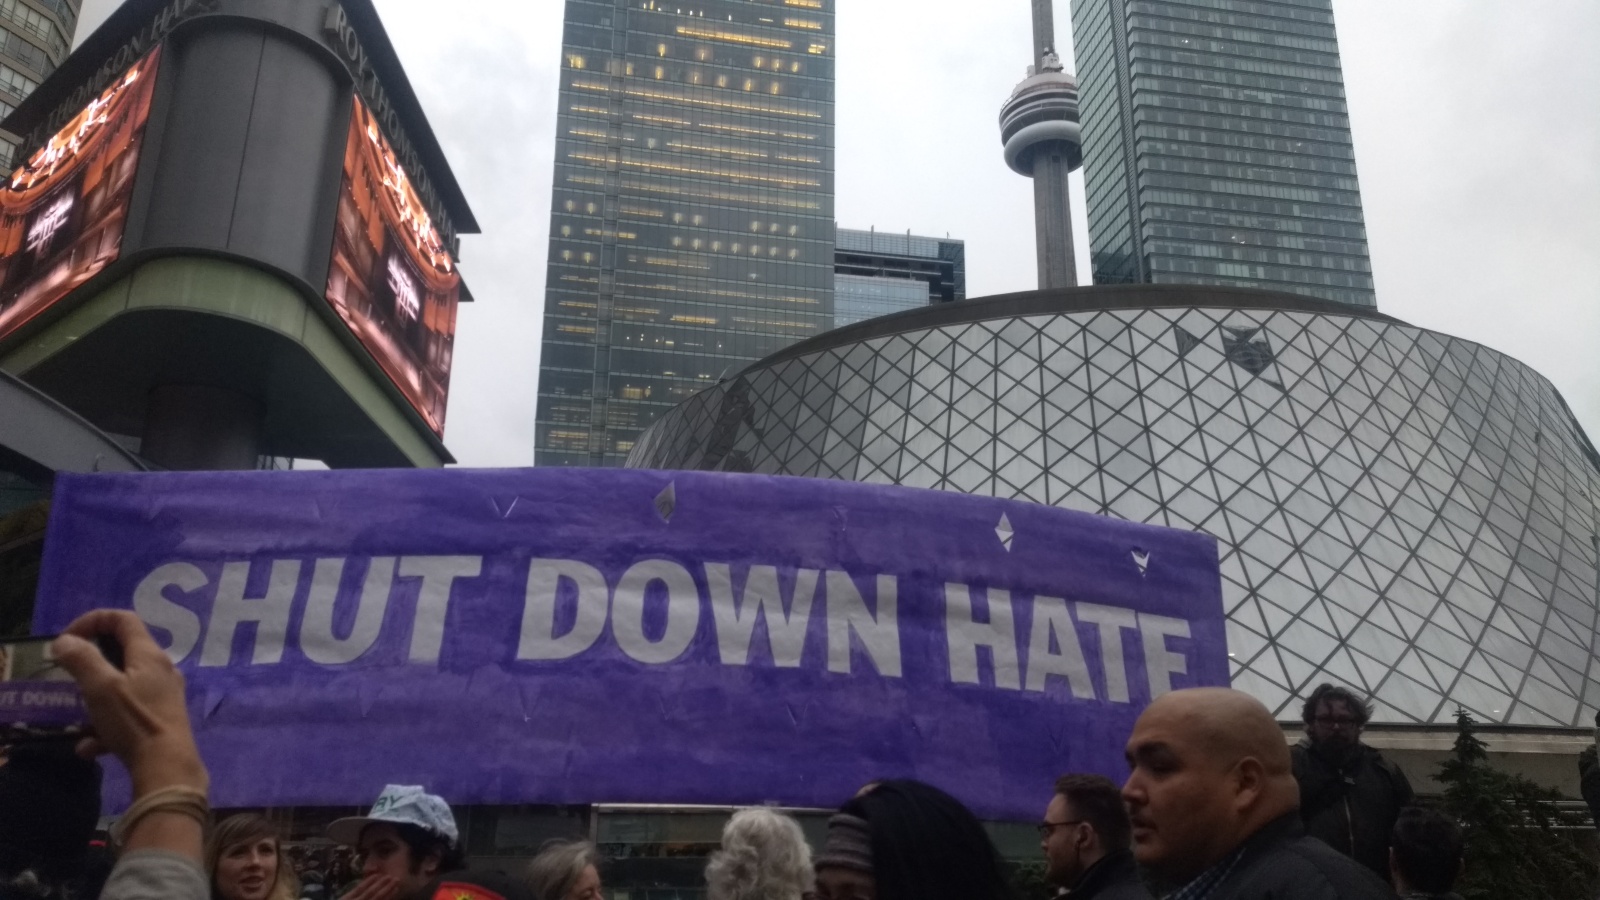 Protesters hold a large banner reading "Shut Down Hate" in front of Roy Thomson Hall.